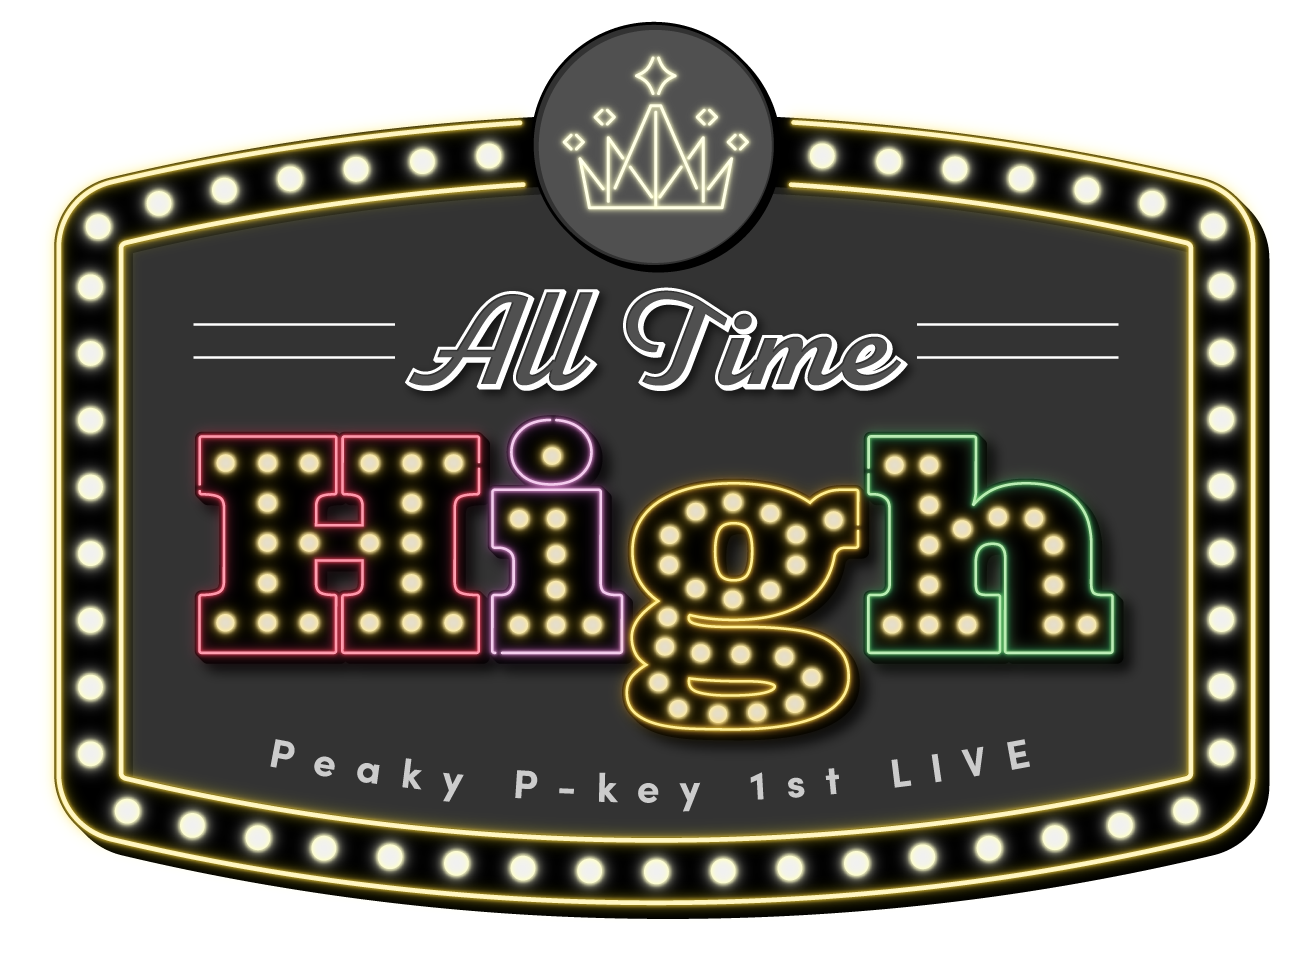 Peaky P-key 1st LIVE All Time High Logo.png